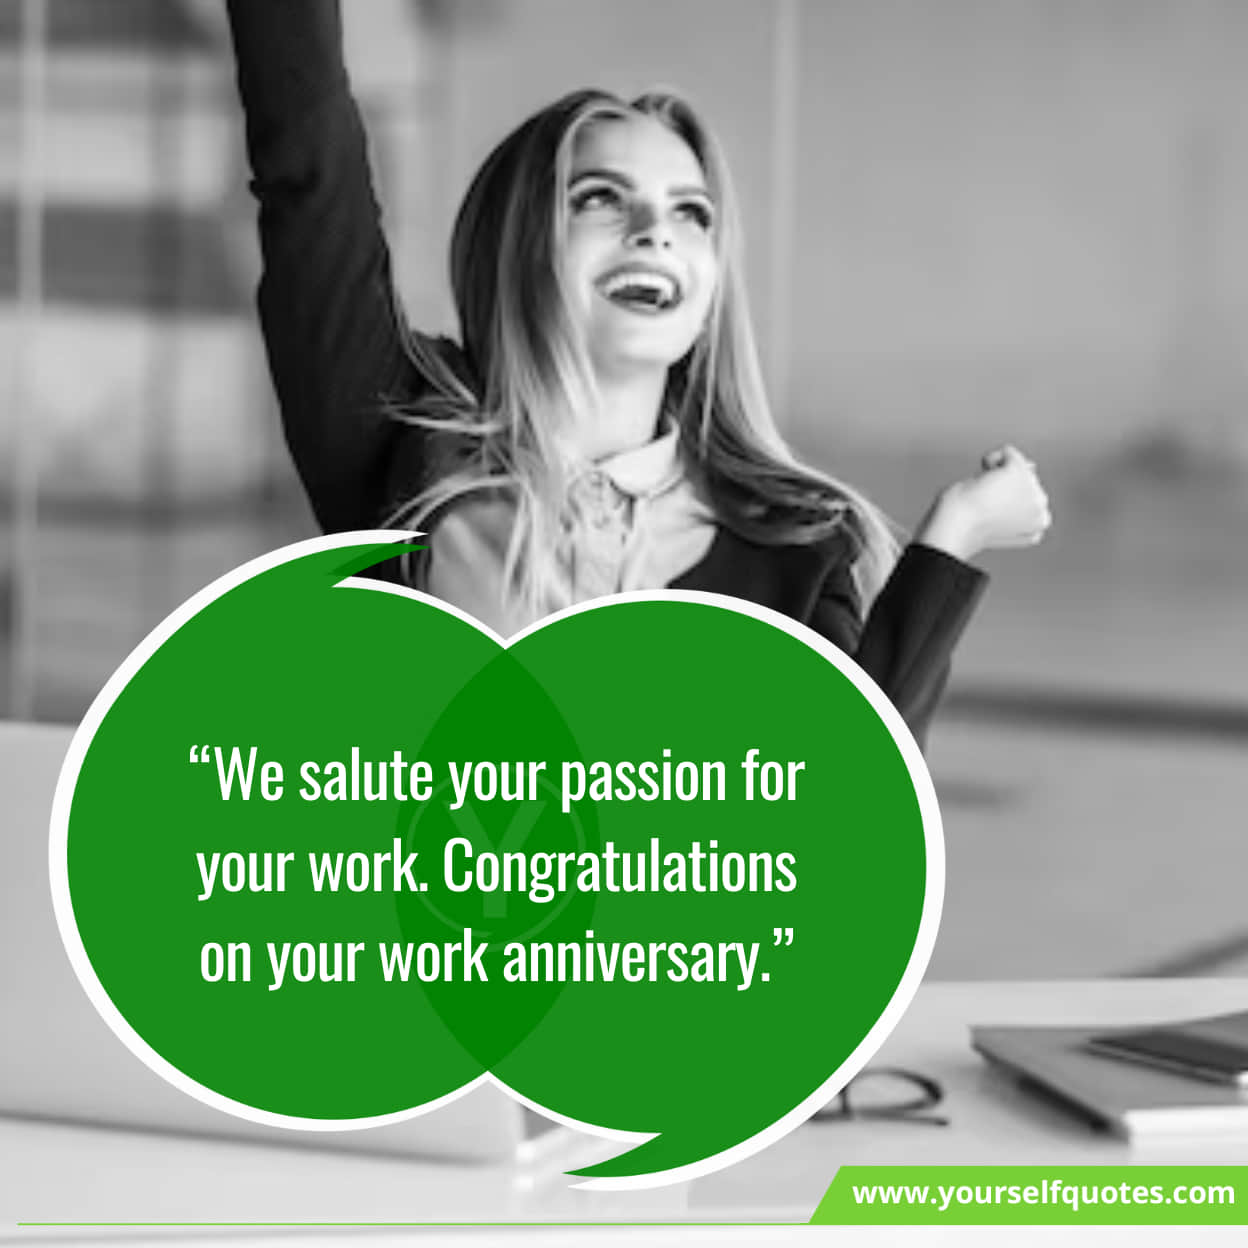 Congratulations on your work anniversary